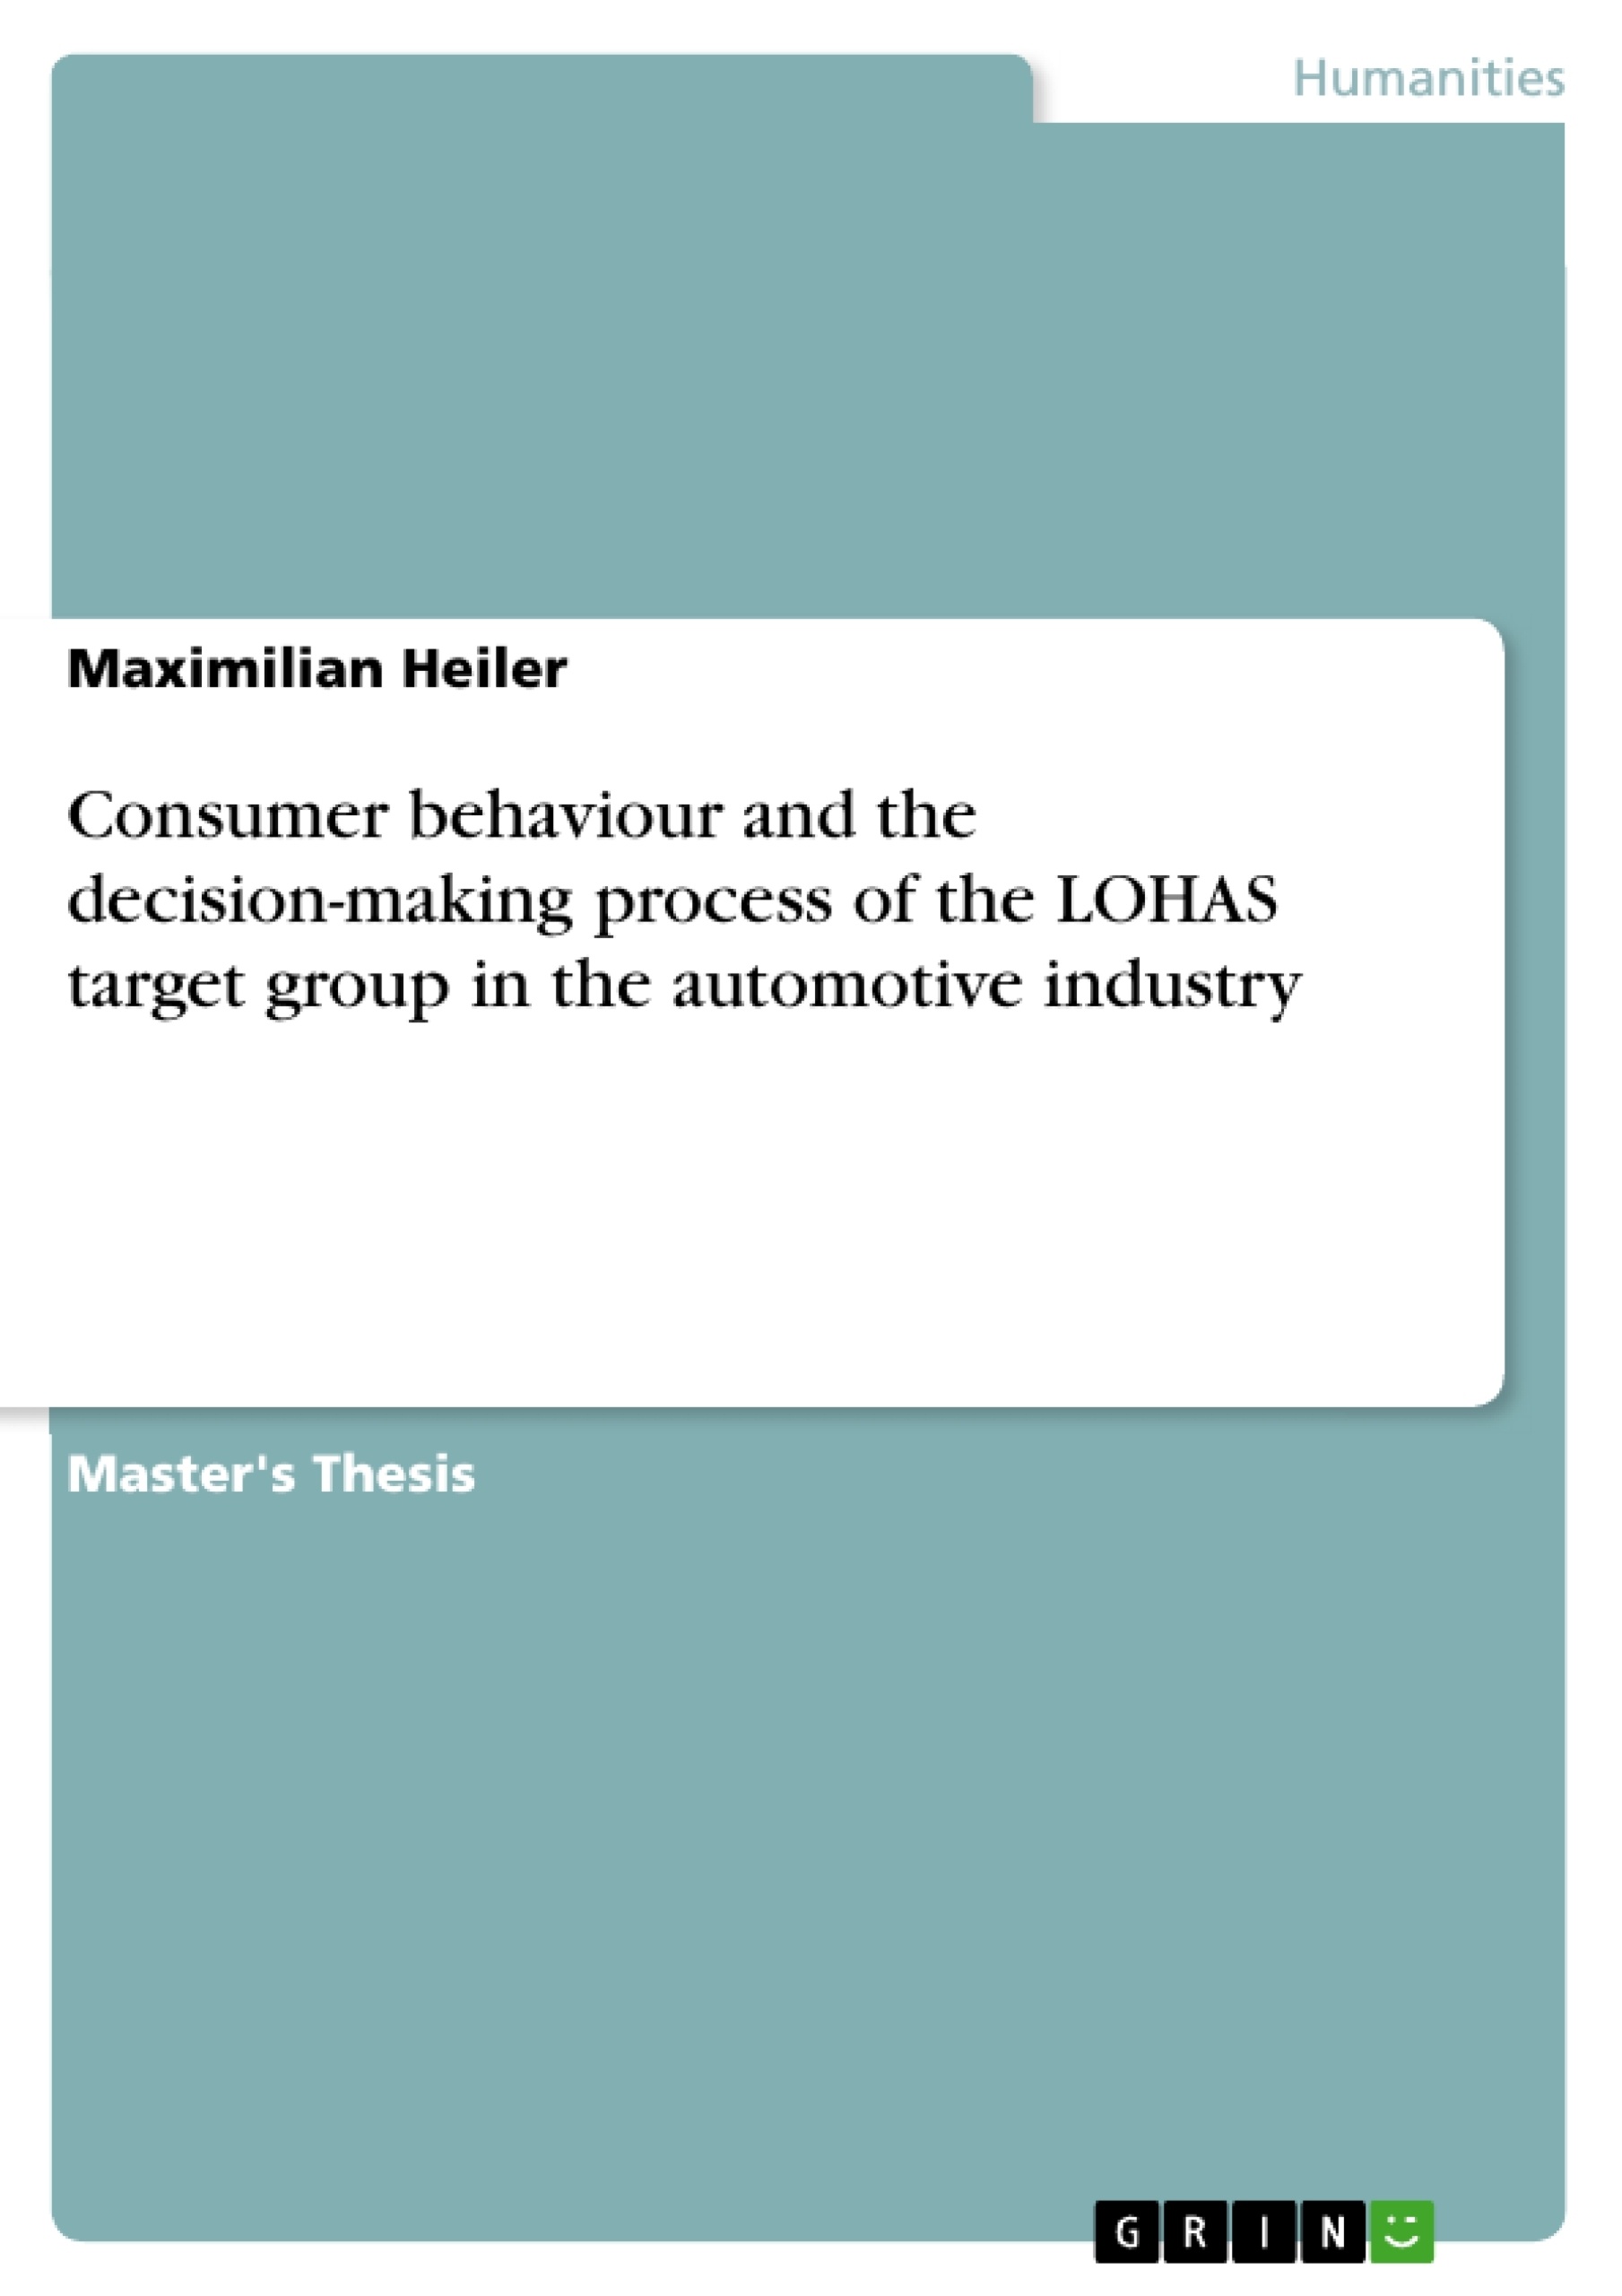 Title: Consumer behaviour and the decision-making process of the LOHAS target group in the automotive industry